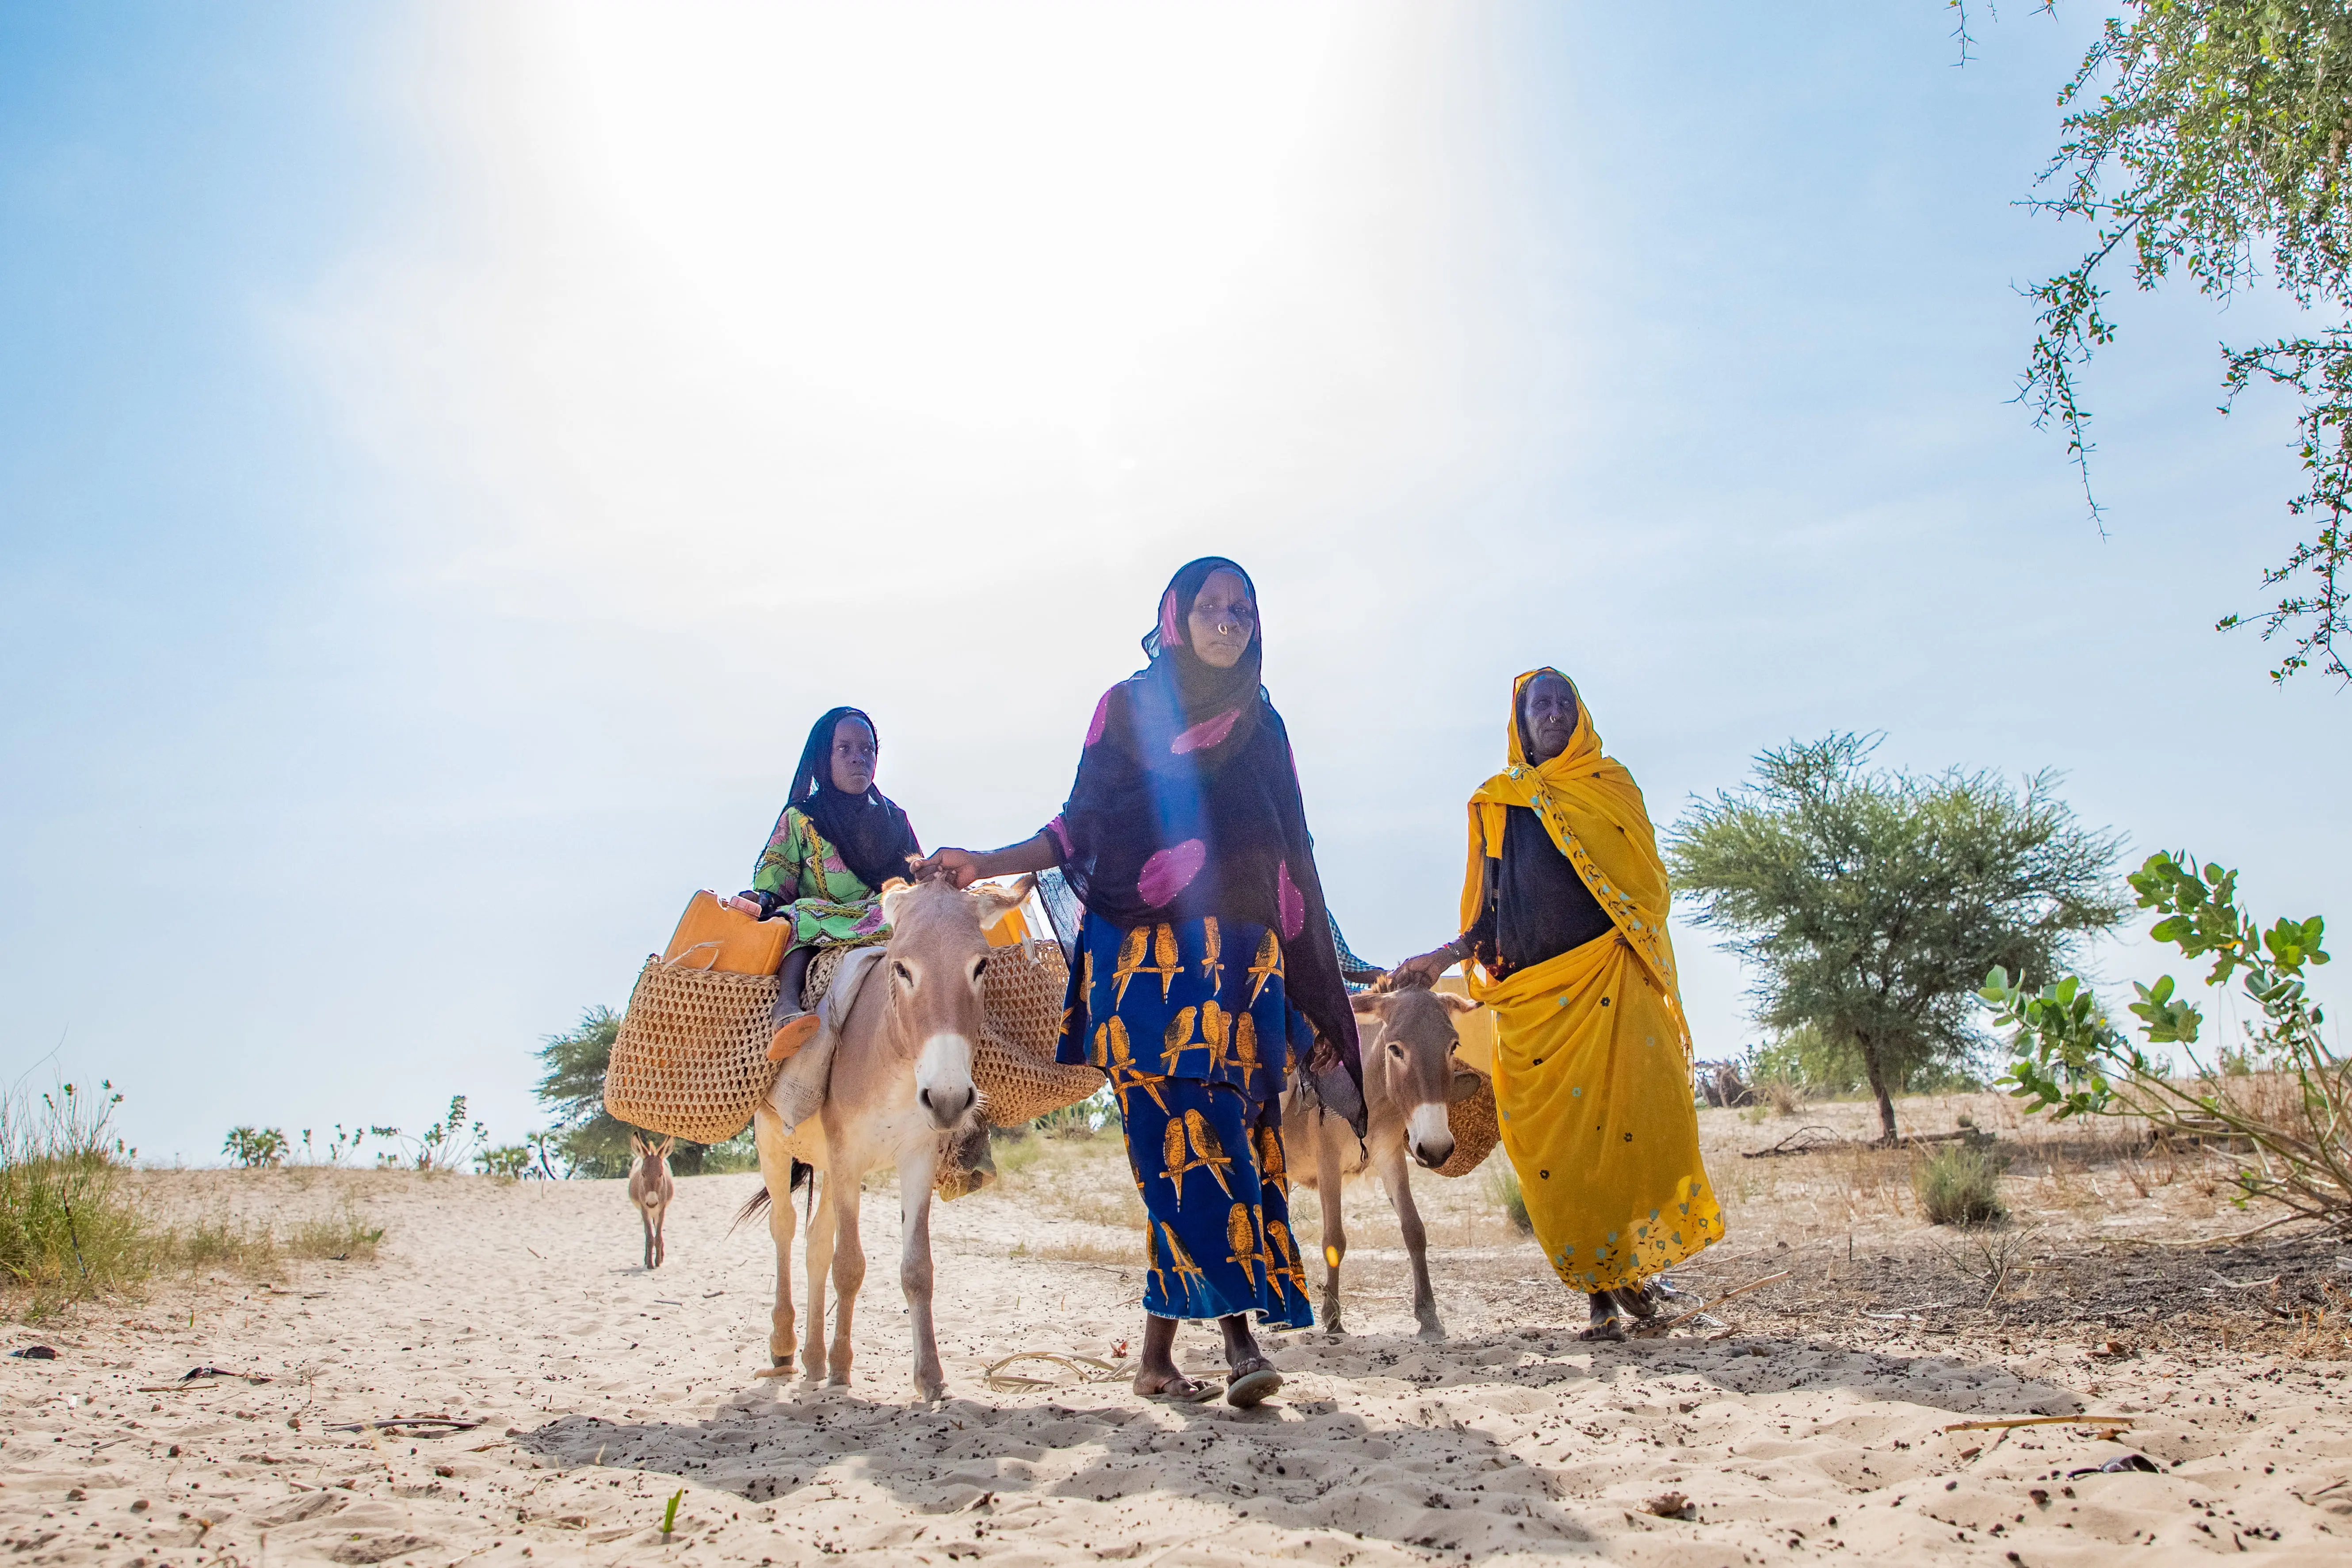 Three women with camels travel far distances to find water in rural Chad.